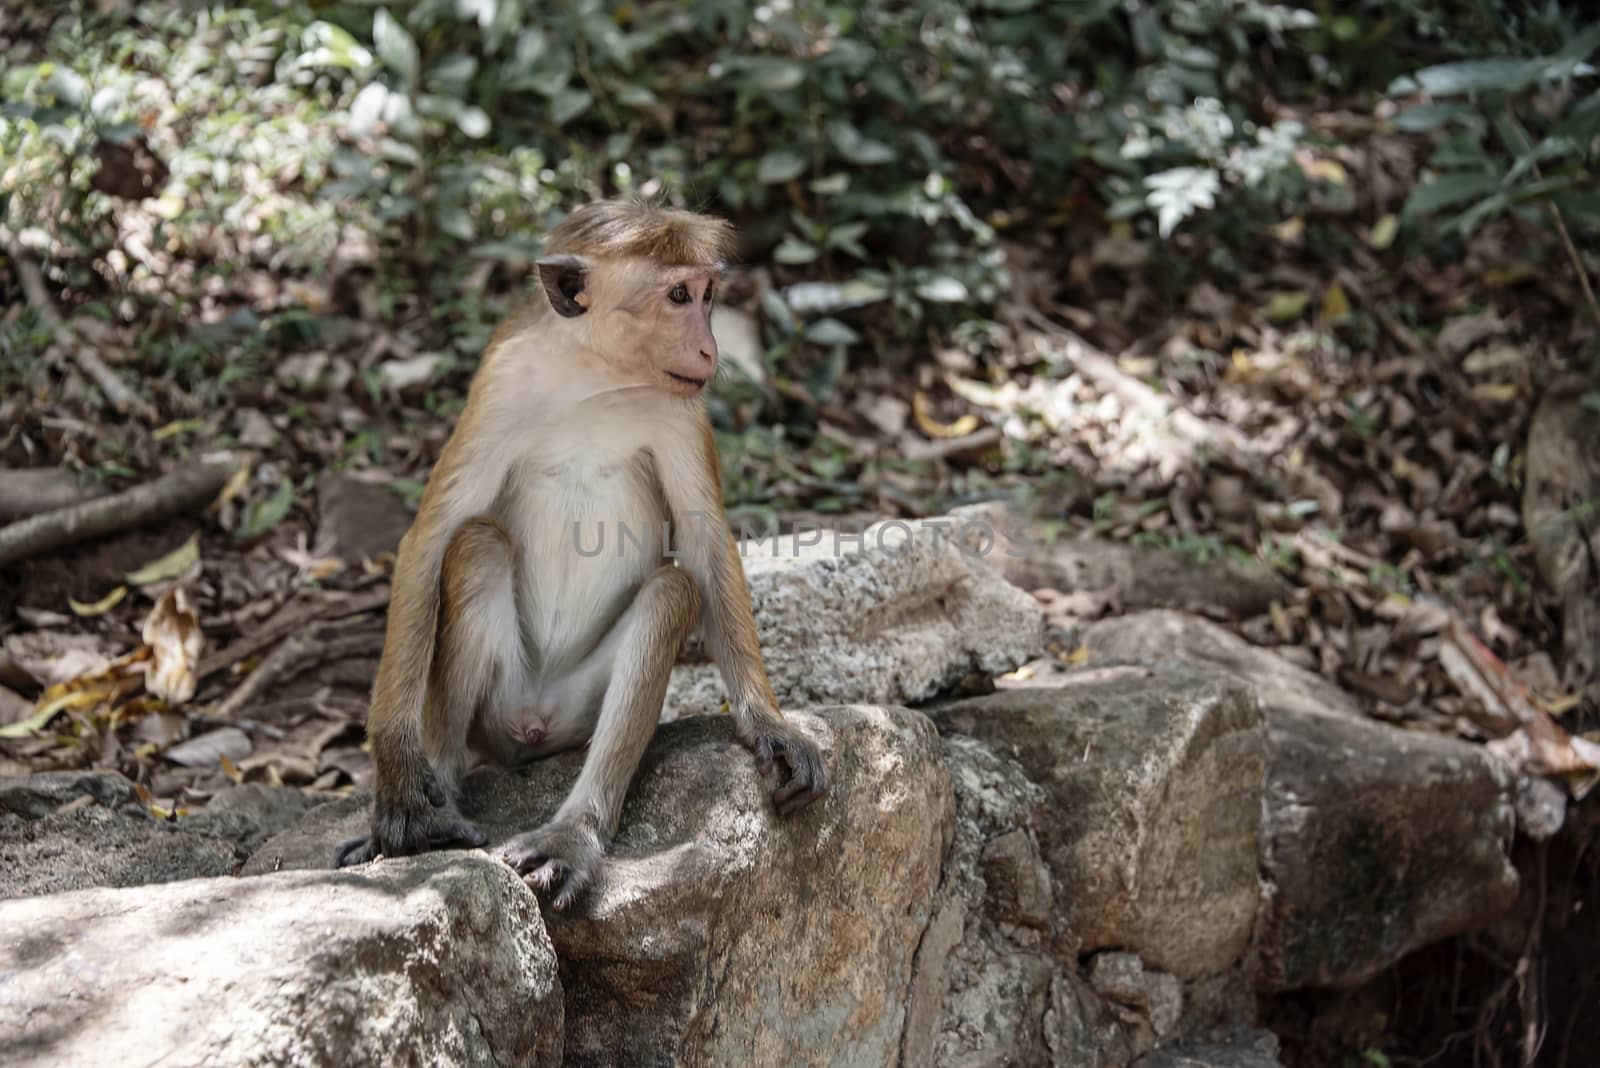 Sri lanka, Sept 2015: Toque Macaque (Macaca sinica) is a commonly found monkey endemic to Sri Lanka